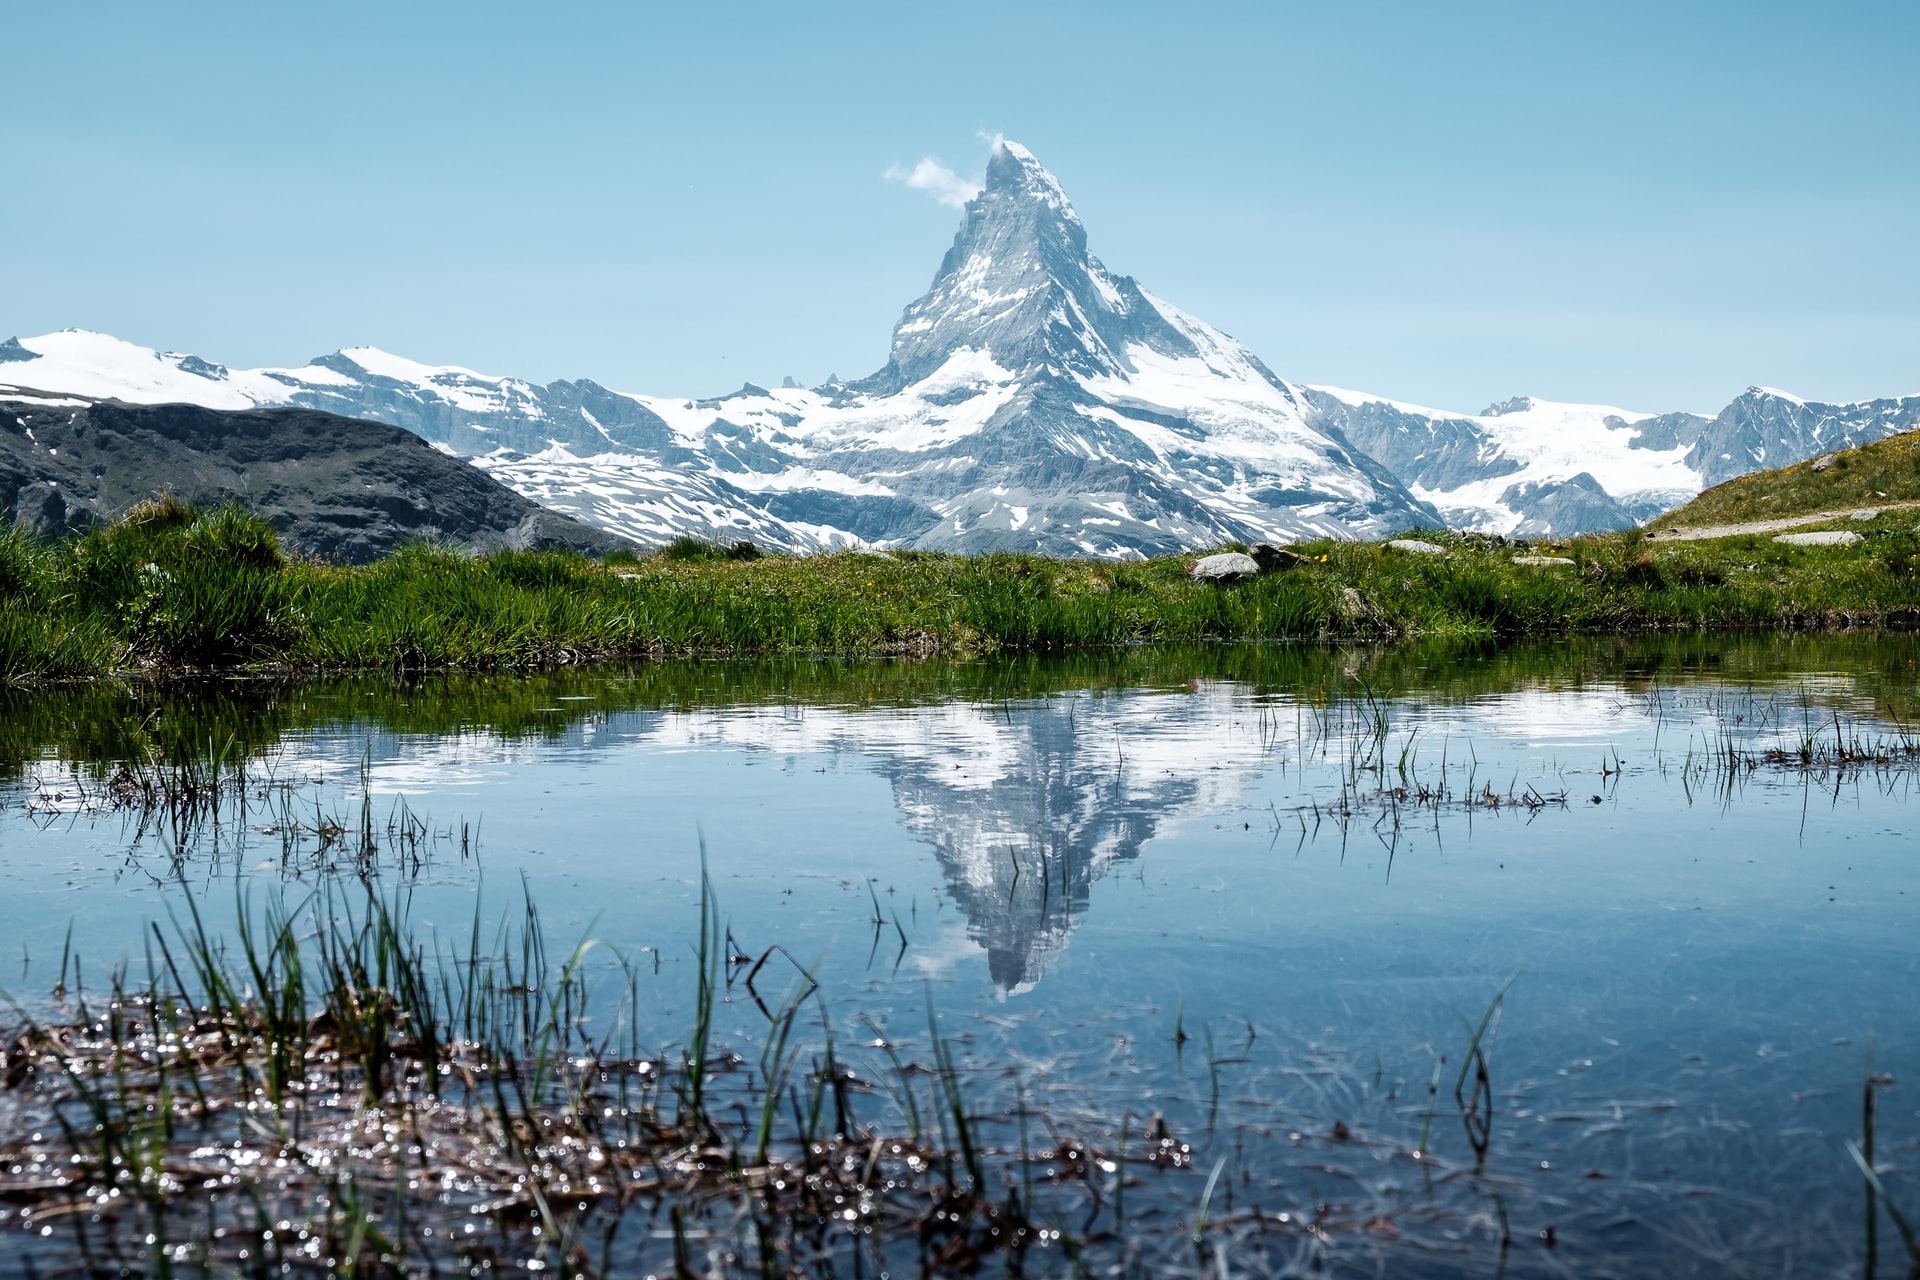 Image shows an alpine mountain covered in ice above a lake